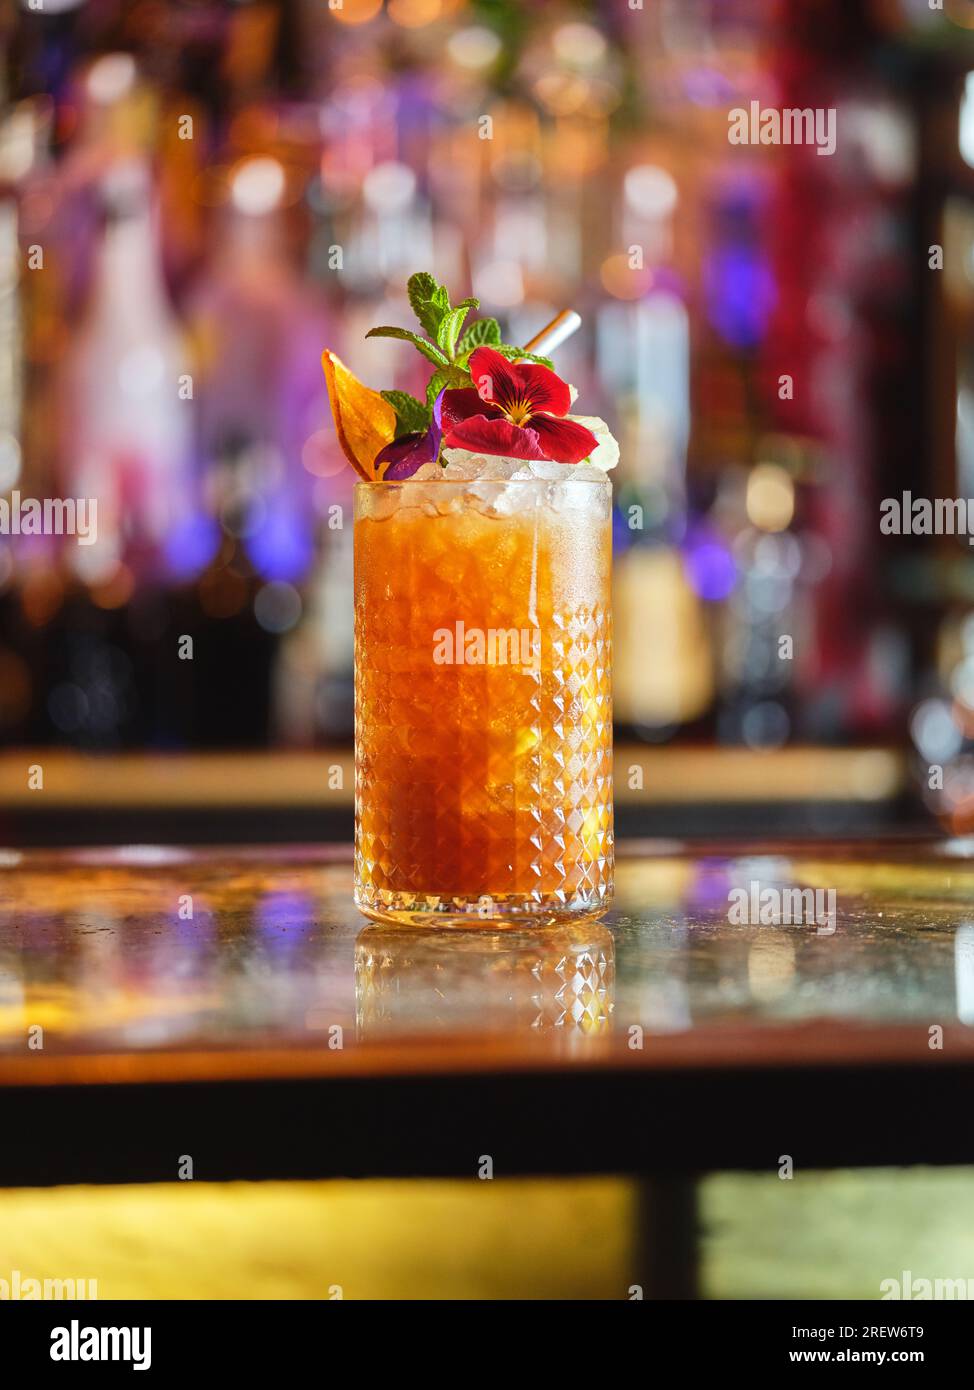 Alcoholic long drink cocktail decorated with flower and orange slice served with straw on bar counter against blurred background Stock Photo